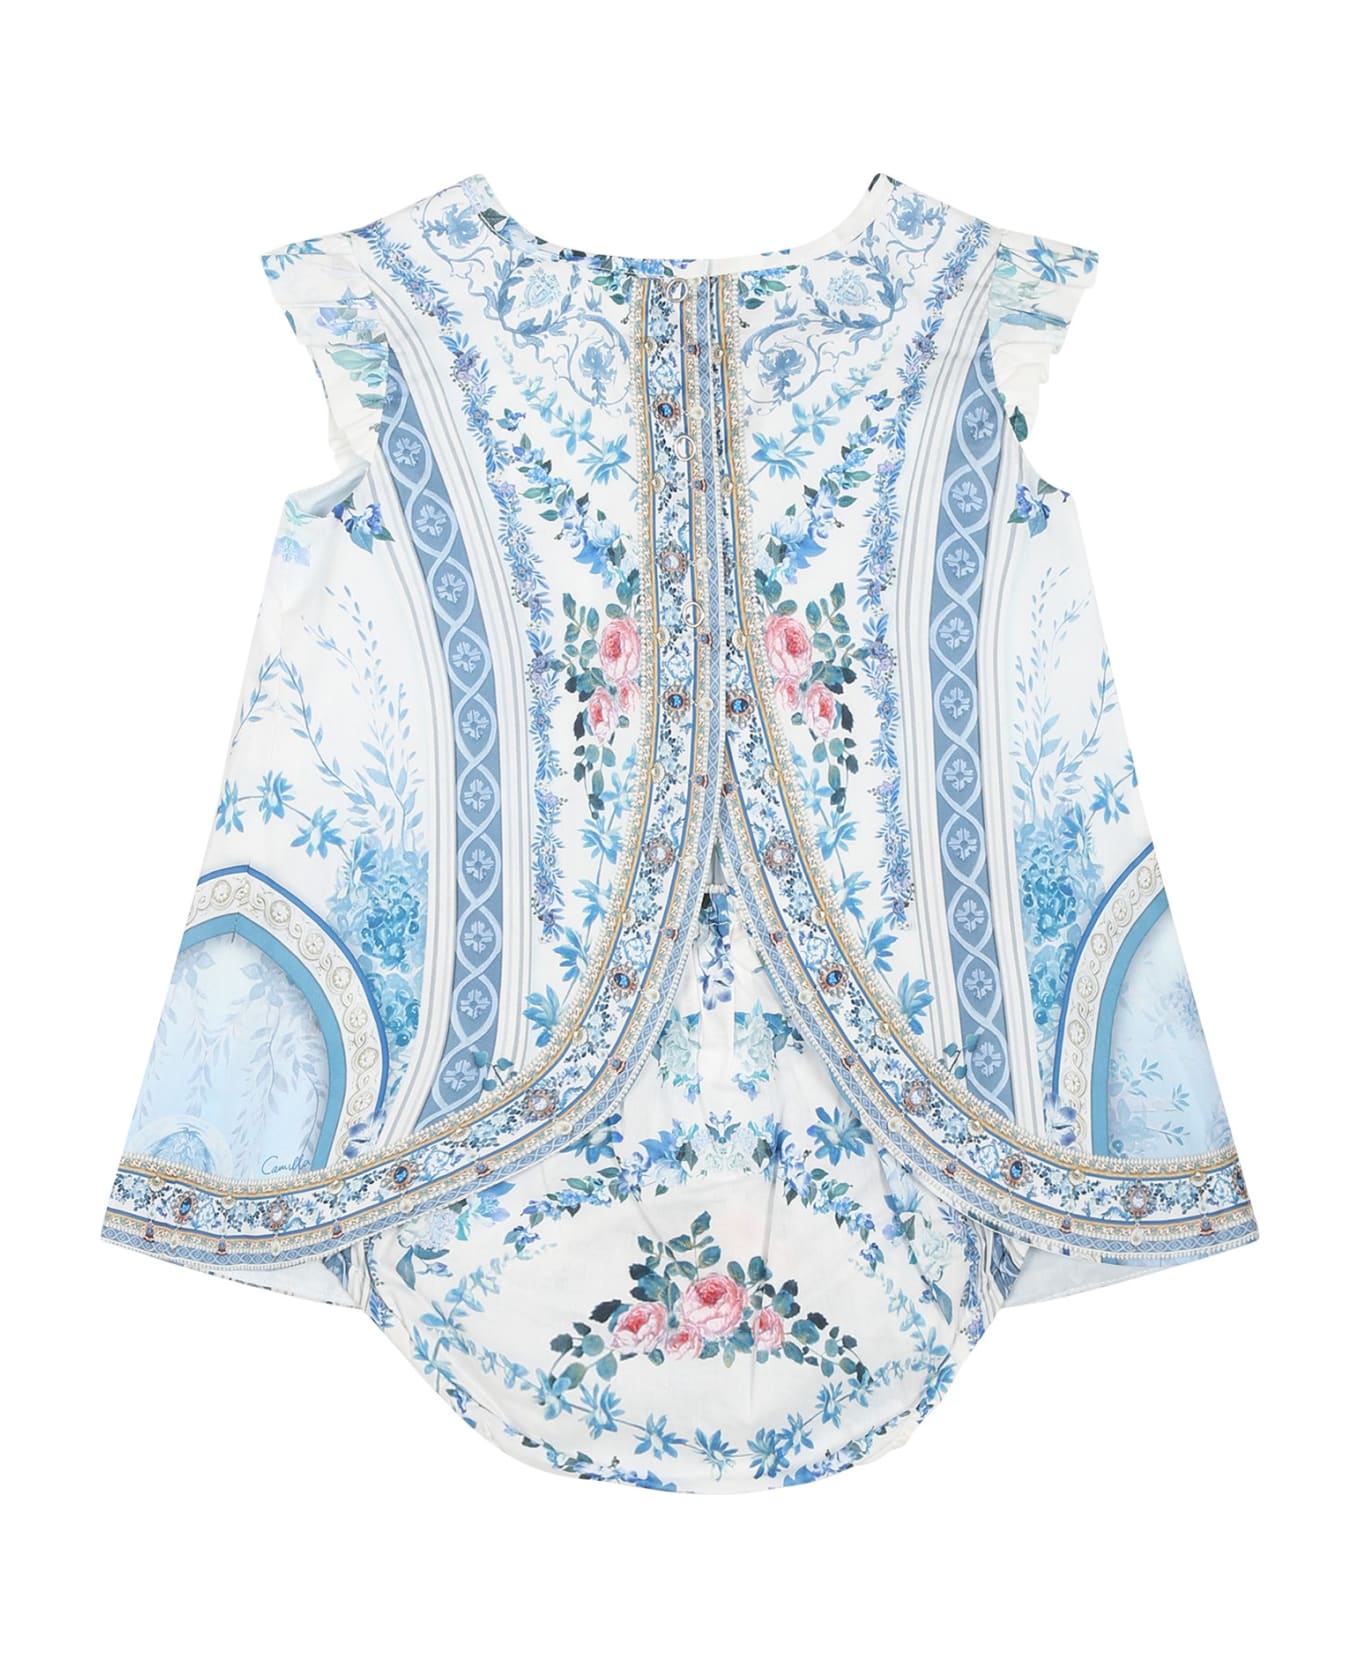 Camilla Light Blue Dress For Baby Girl With Floral Print - Light Blue